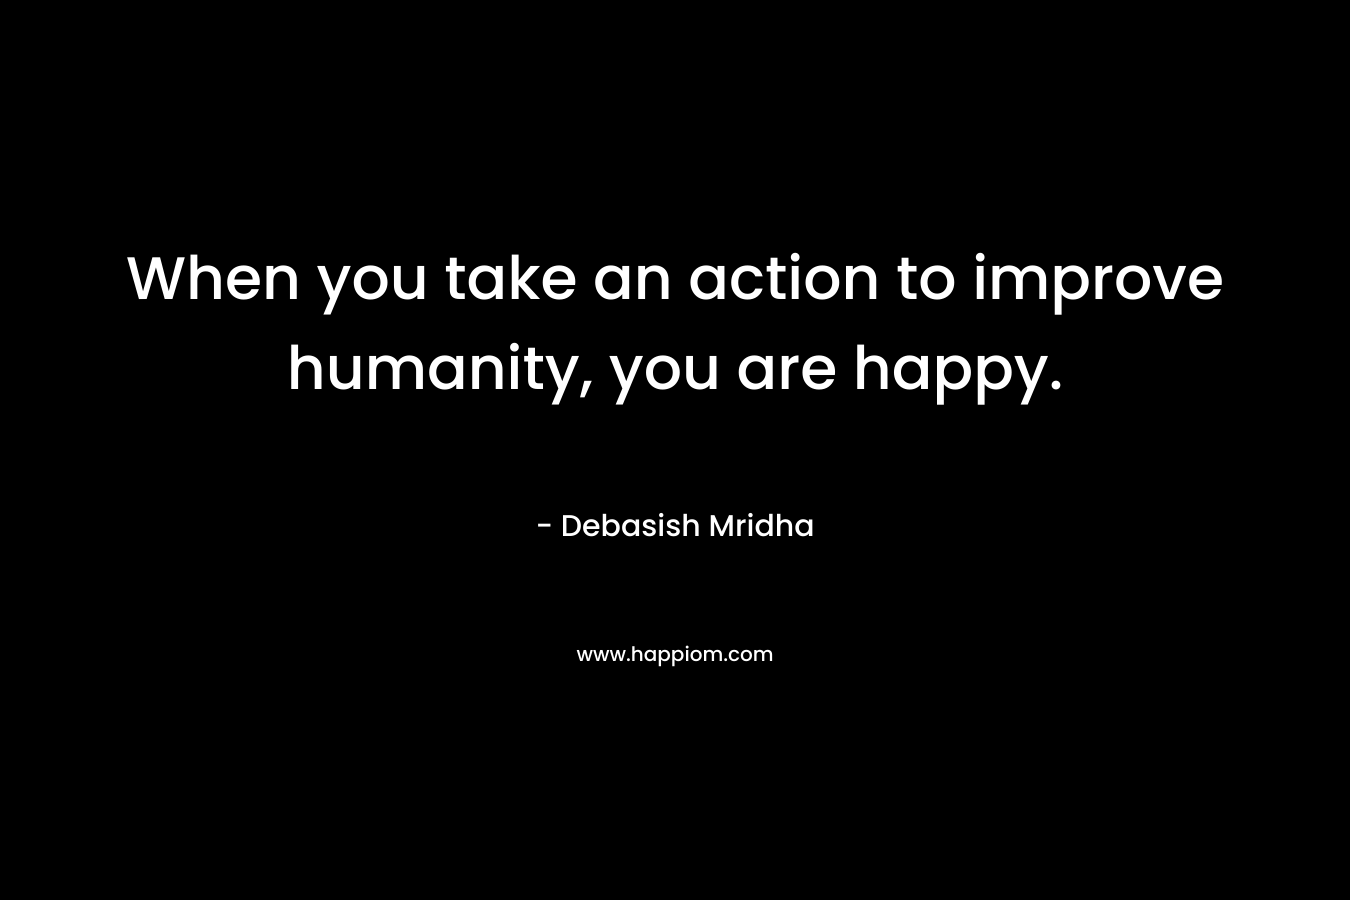 When you take an action to improve humanity, you are happy.